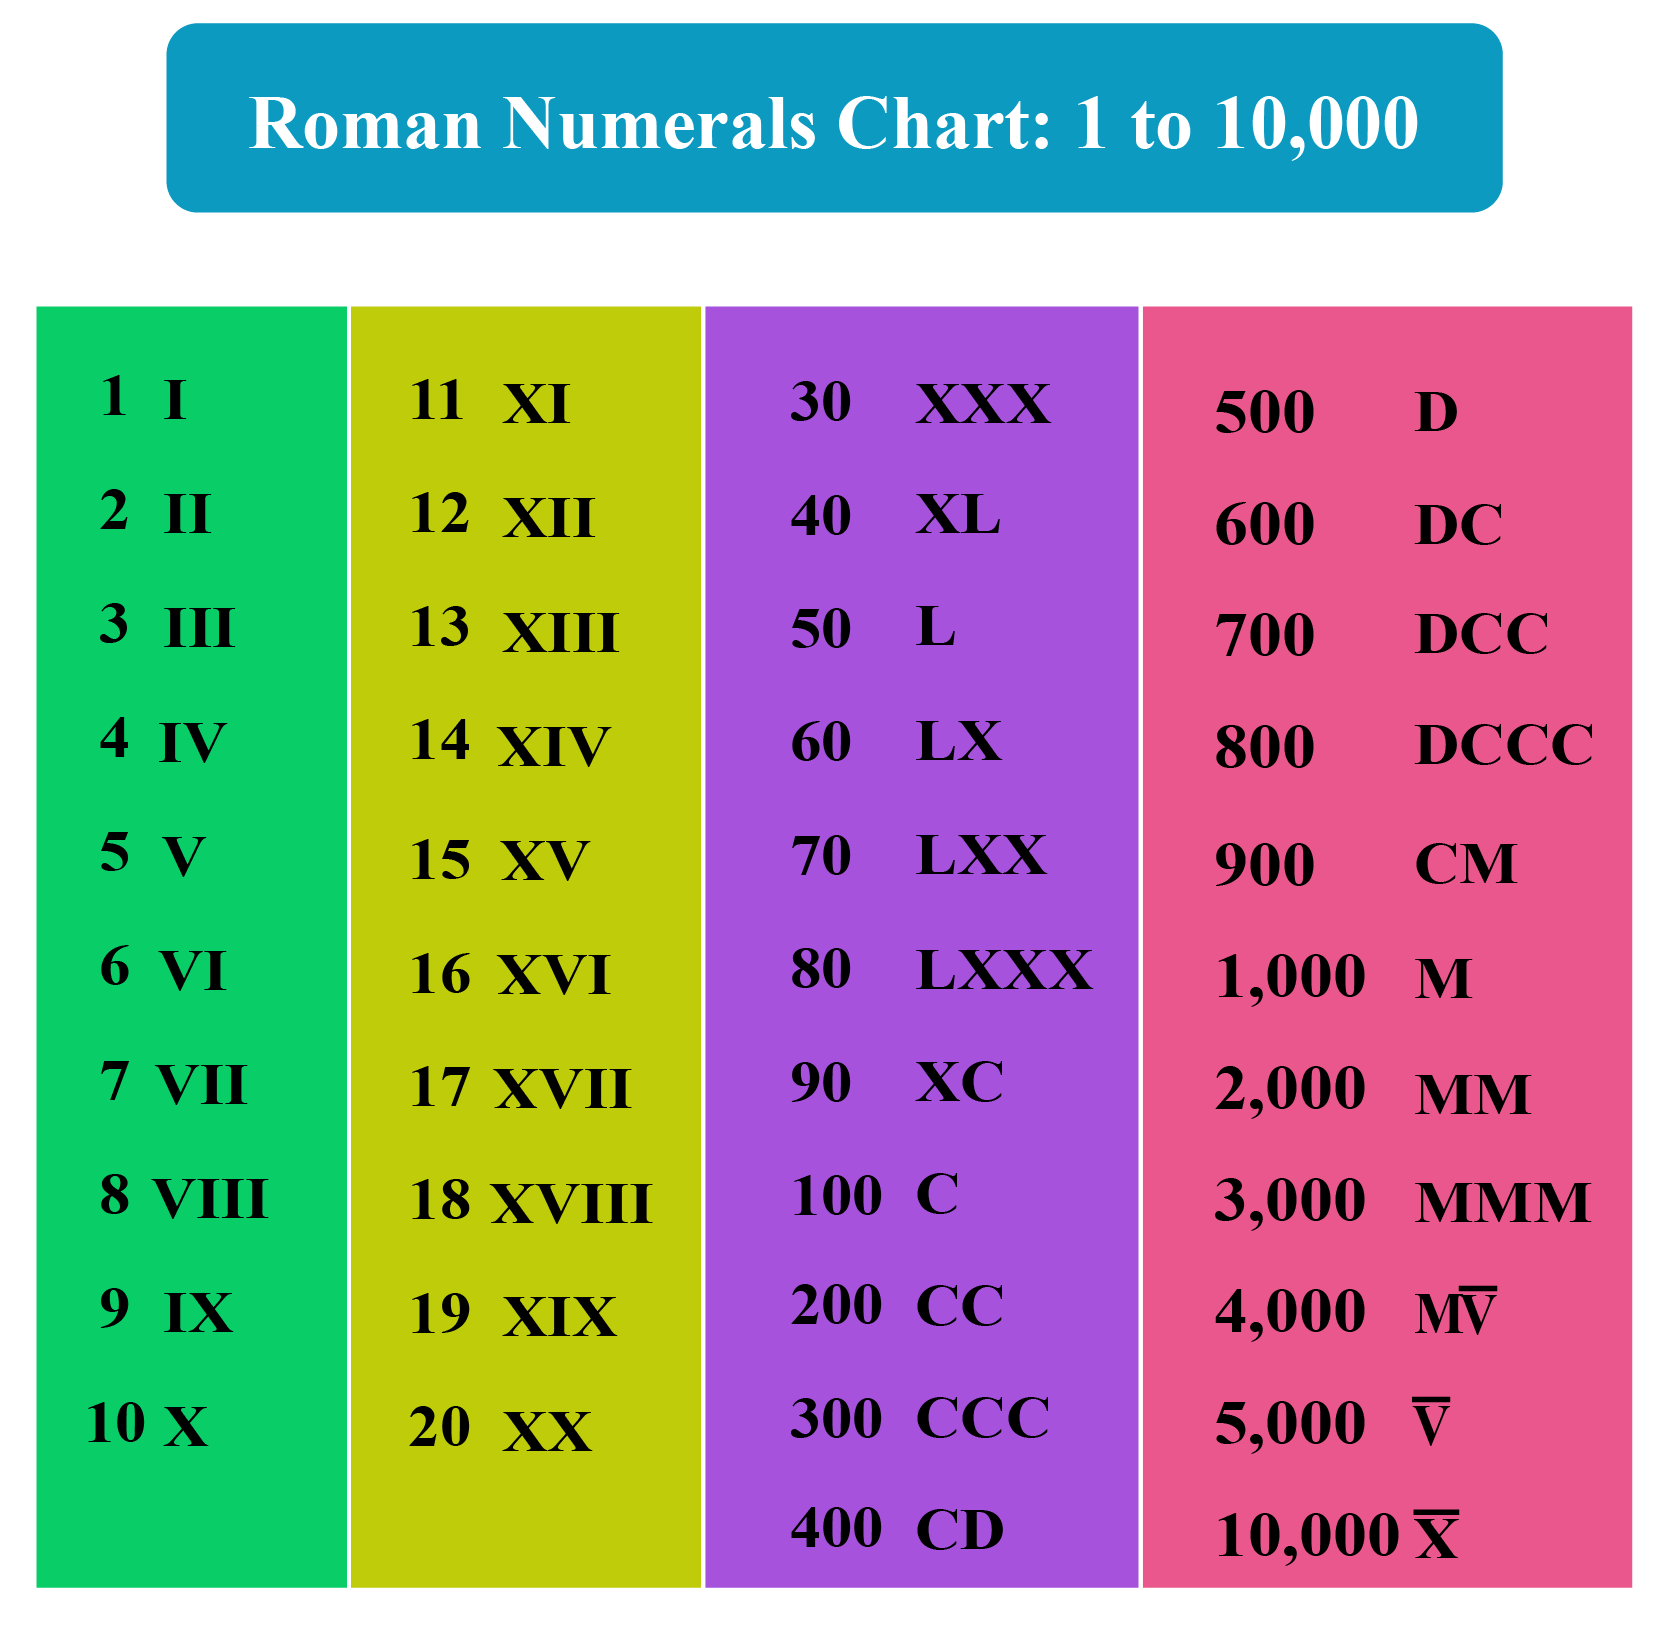 Roman Numerals Maths4all ROMAN NUMERALS 1901 TO 2000 Each Letter s